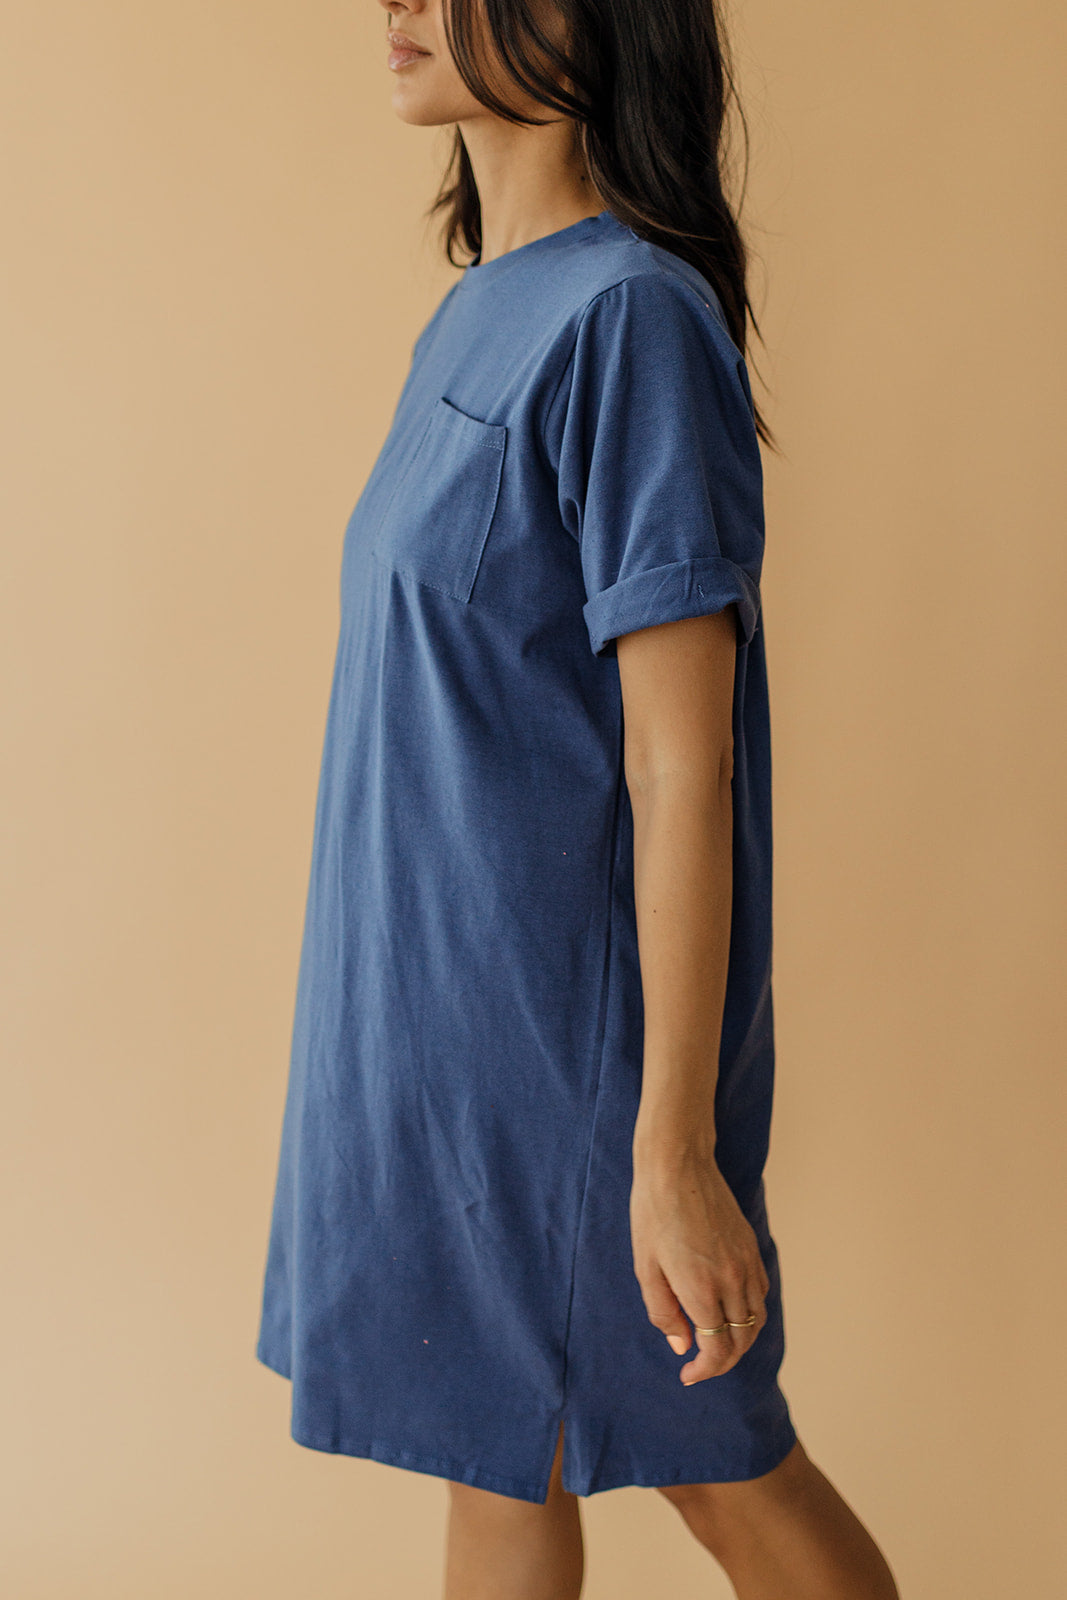 THE EASY DOES IT POCKET T-SHIRT DRESS BY PINK DESERT IN DENIM BLUE